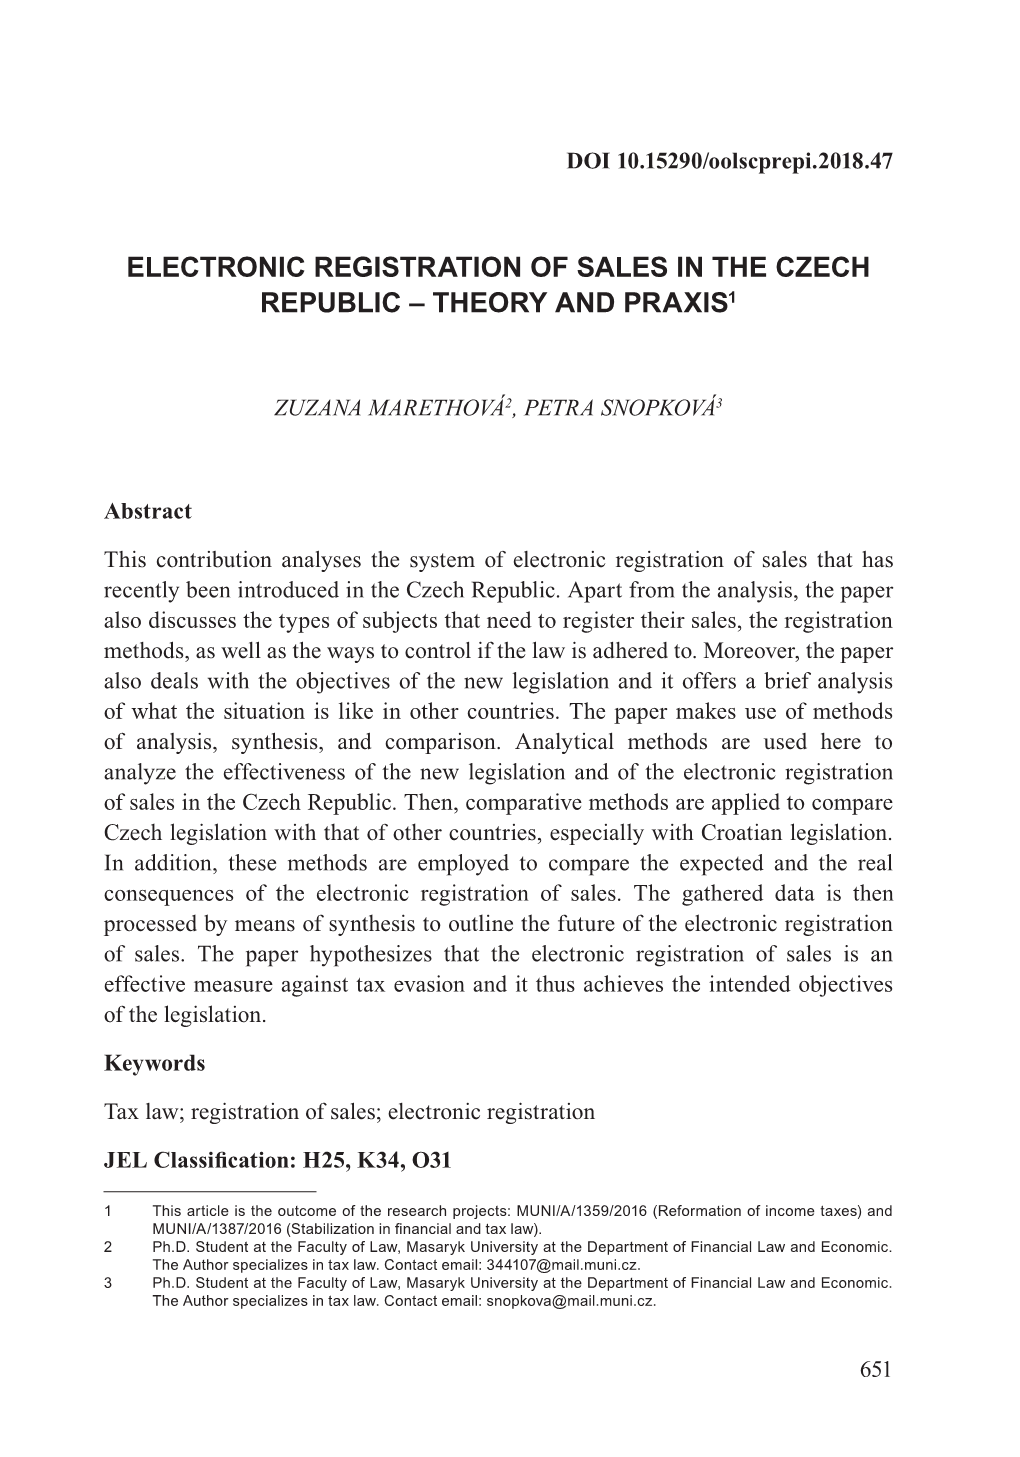 Electronic Registration of Sales in the Czech Republic – Theory and Praxis1